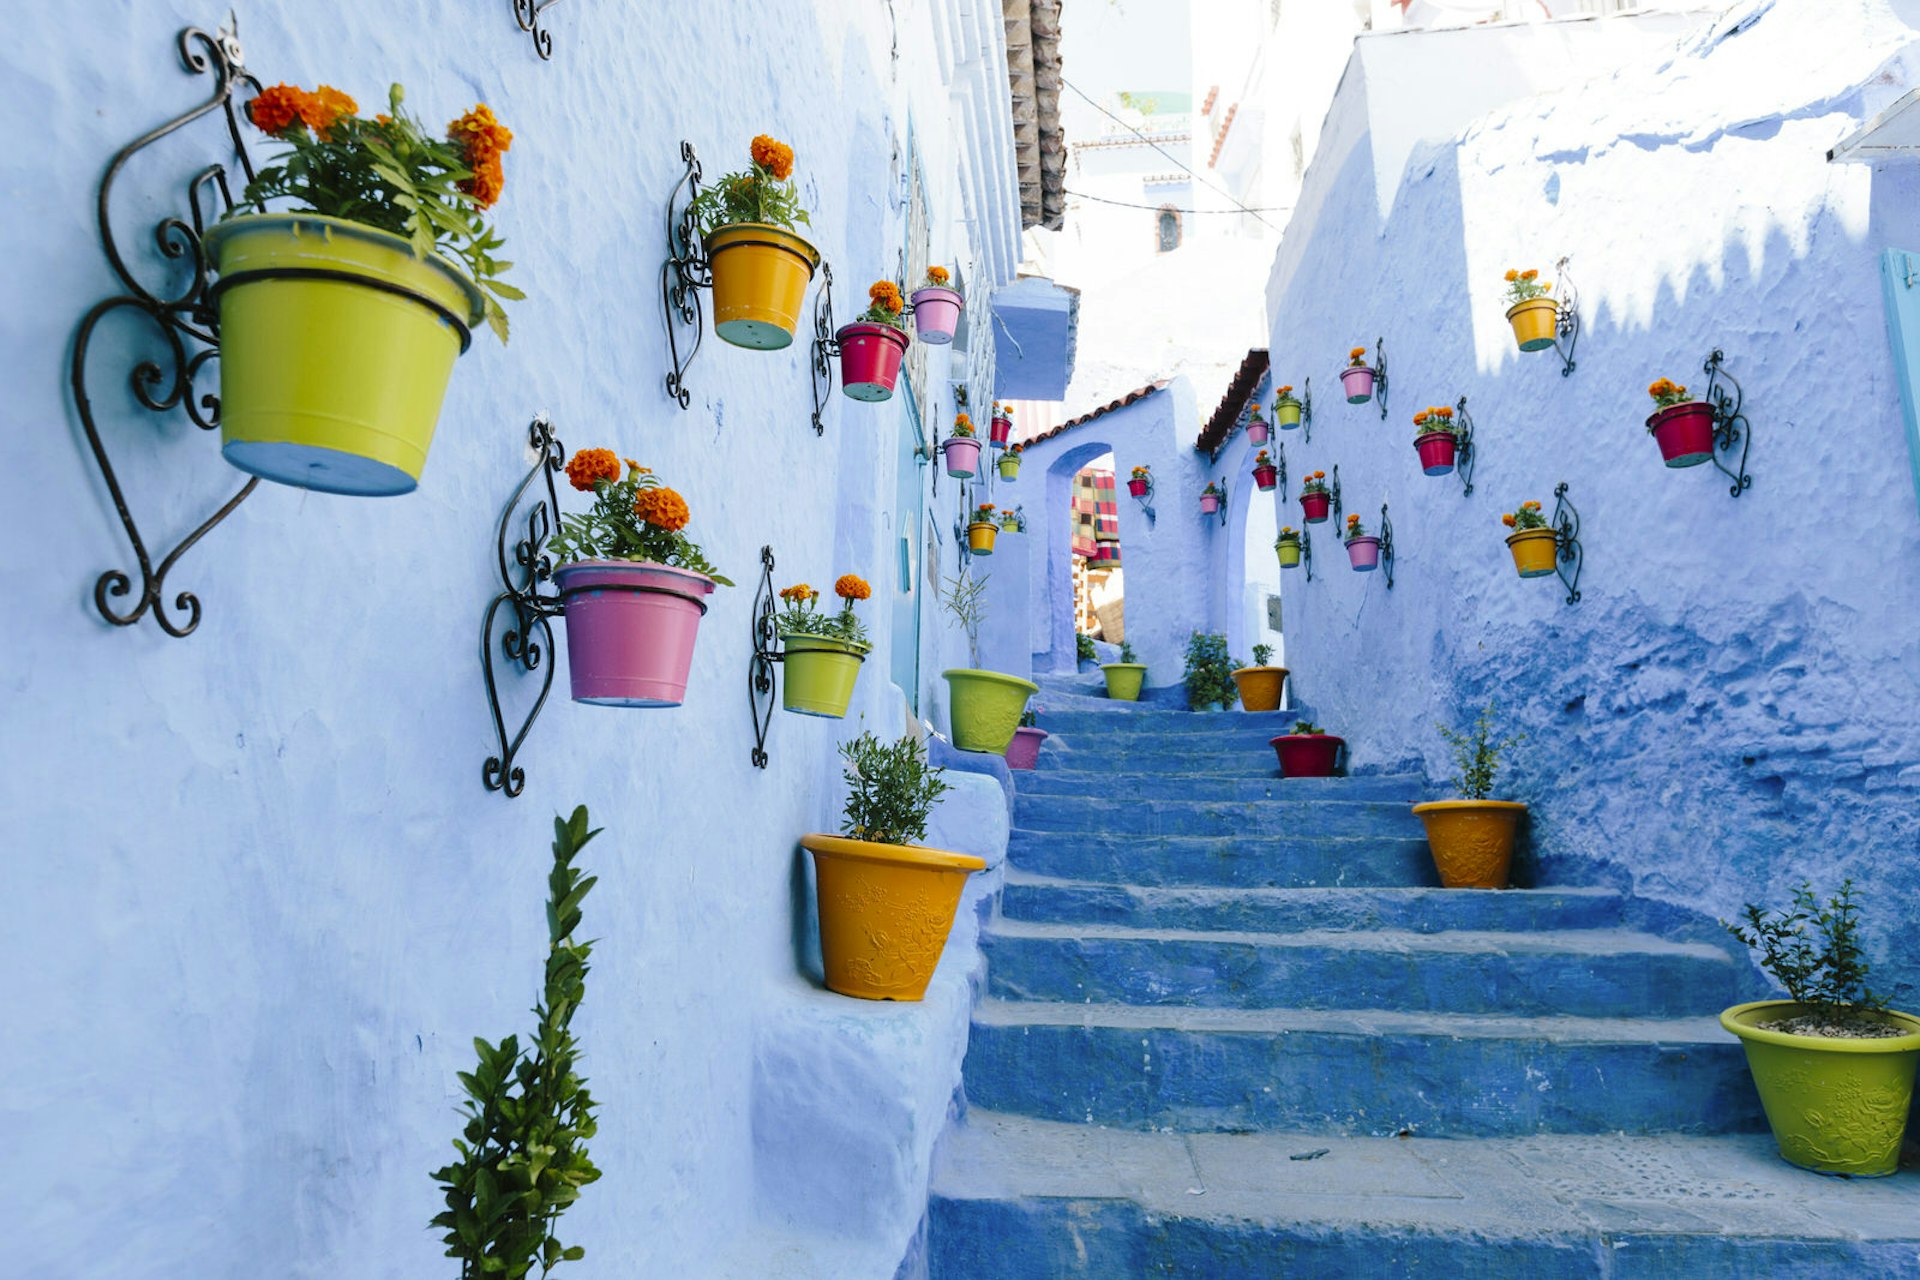 A blue staircase in the medina of Chefchaouen lined with colourful flower pots. The staircase leads up to several houses. Image by Christine Wehrmeier / Getty Images